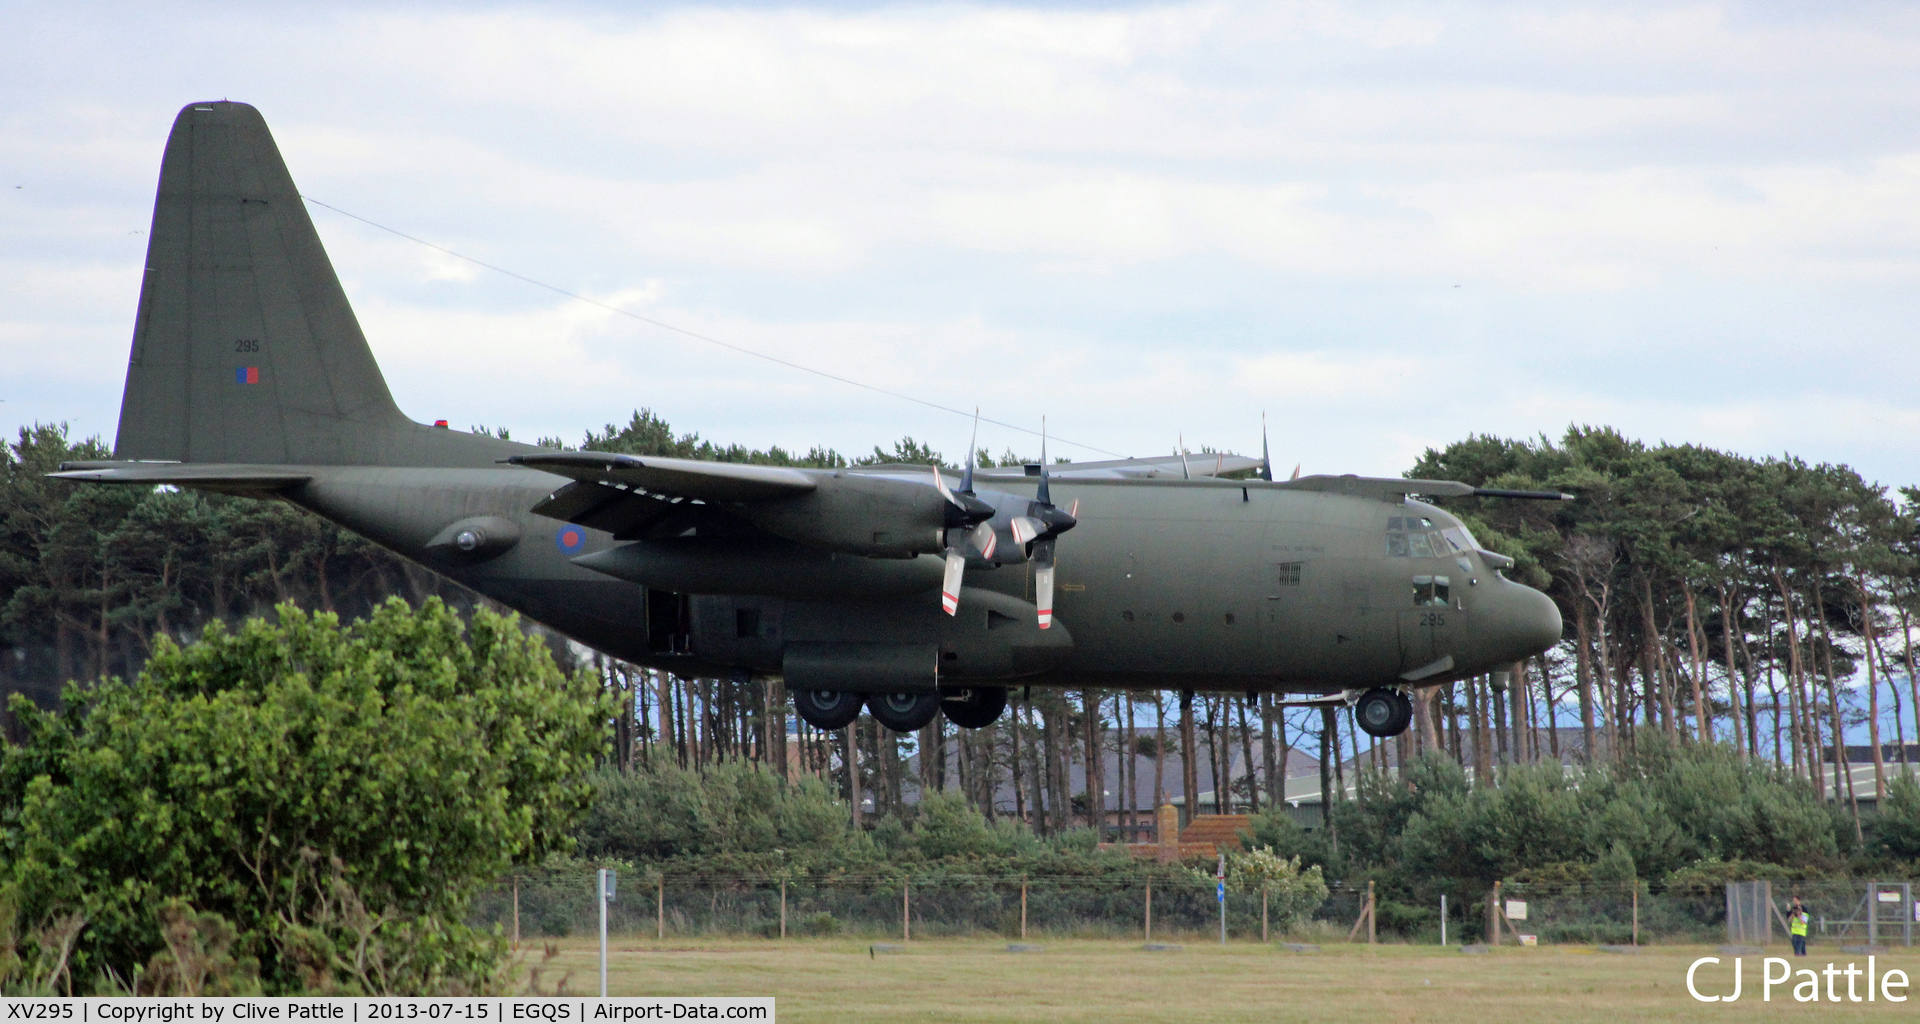 XV295, 1967 Lockheed C-130K Hercules C.1 C/N 382-4261, Over the fence at Lossiemouth